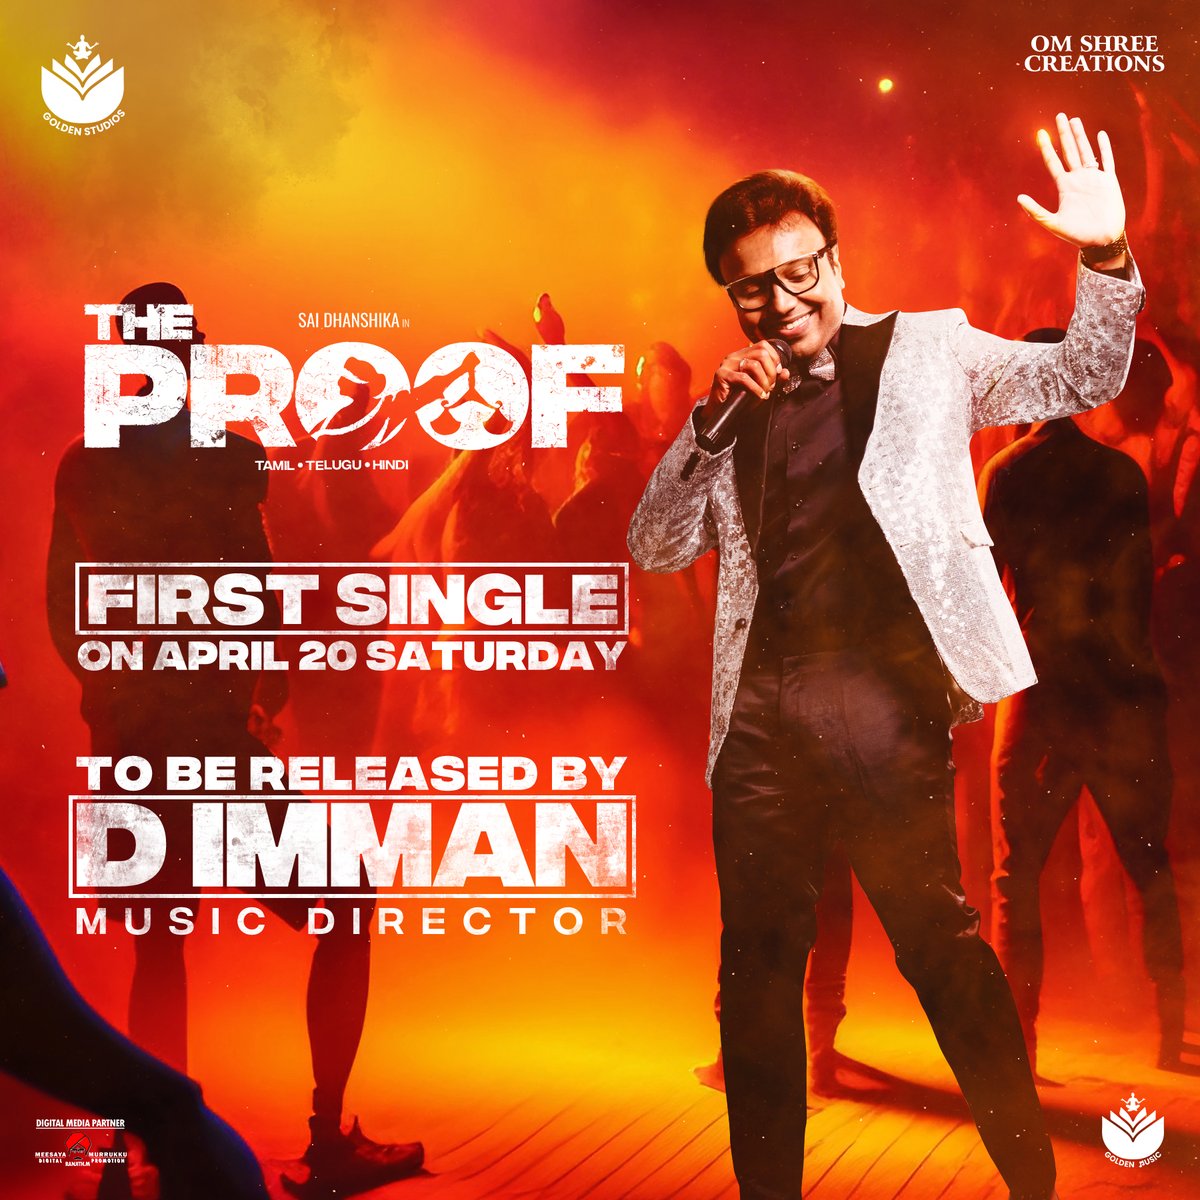 Sai Dhanshika's #TheProof - First Single Song Will Be Released By Music Director D Imman On April 20 Film Releasing In Theatres On May 3rd @Radhika_master @GomathiSathyaa @GOLDENSTUDIOS23